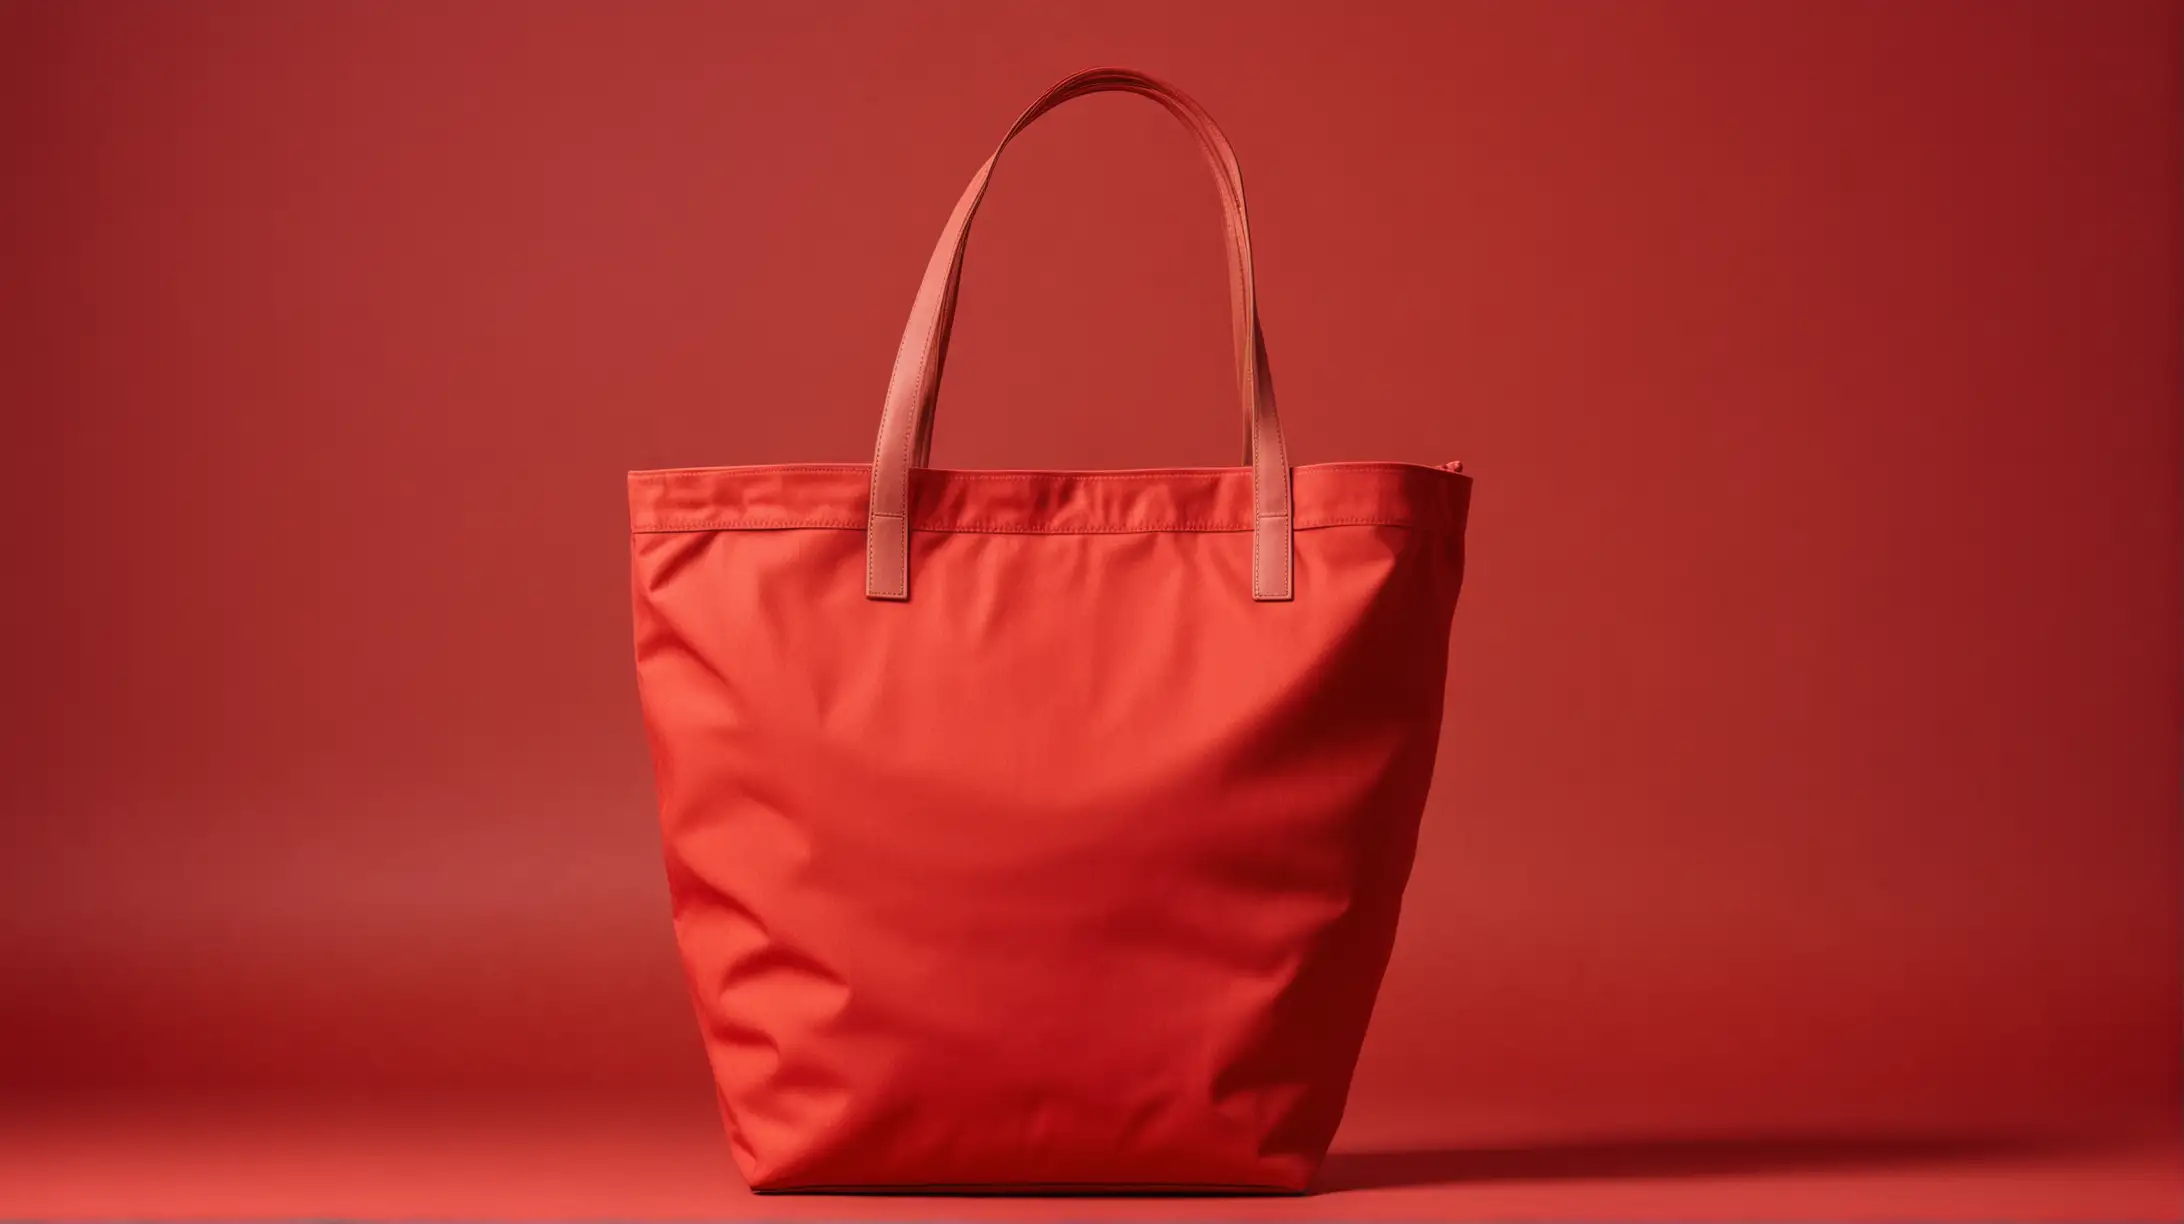 Red canvas tote floating againts a red background in the style of surrealistic masterpieces, the düsseldorf school of photography, red background product design, avant-garde portraiture
